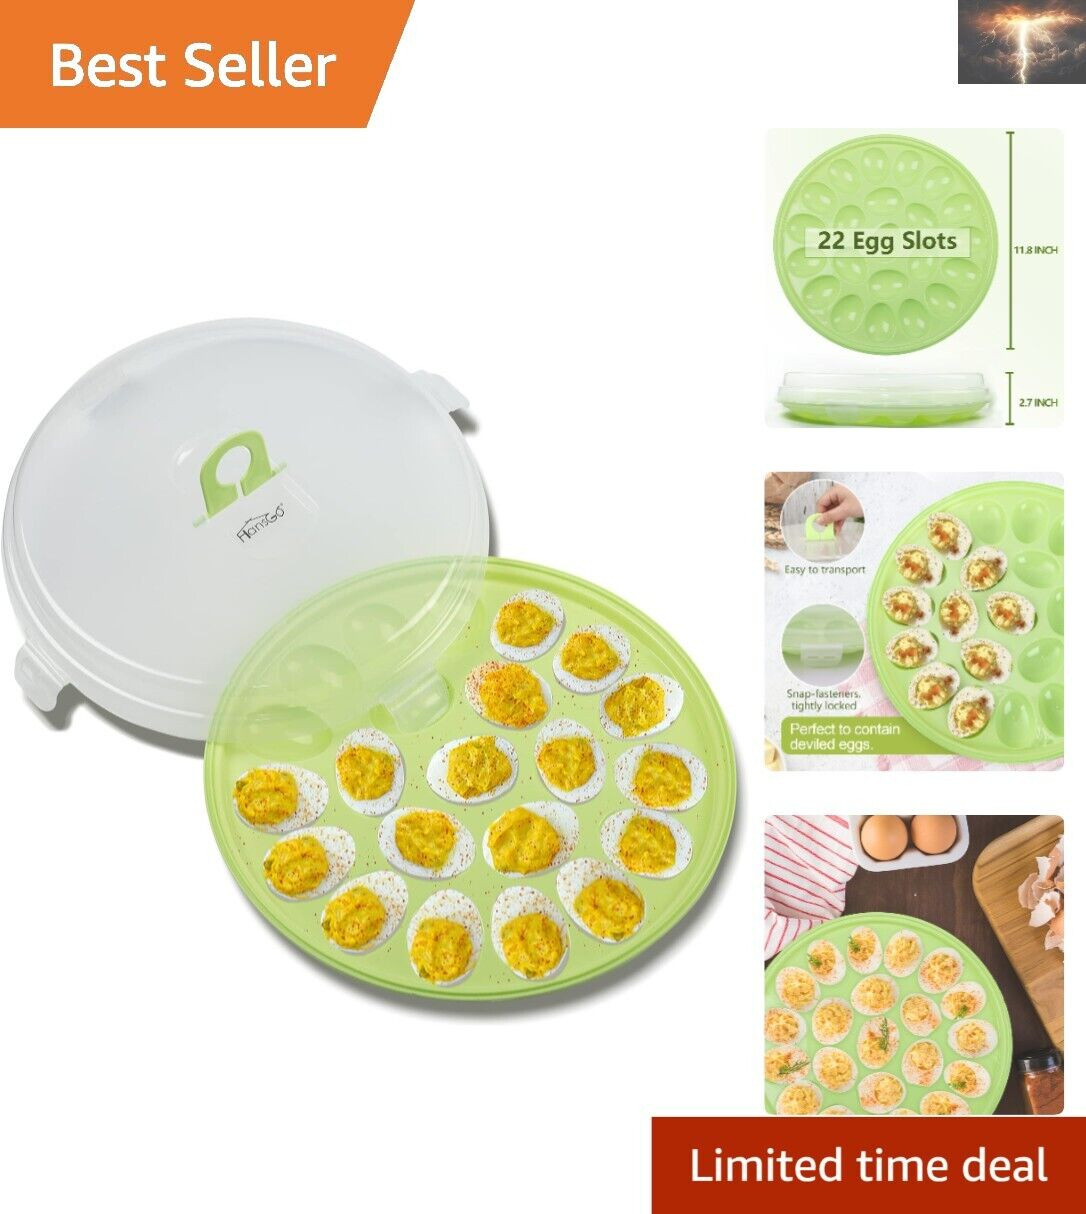 Elegant round Deviled Egg Platter and Carrier with Lid for Kitchen and Parties